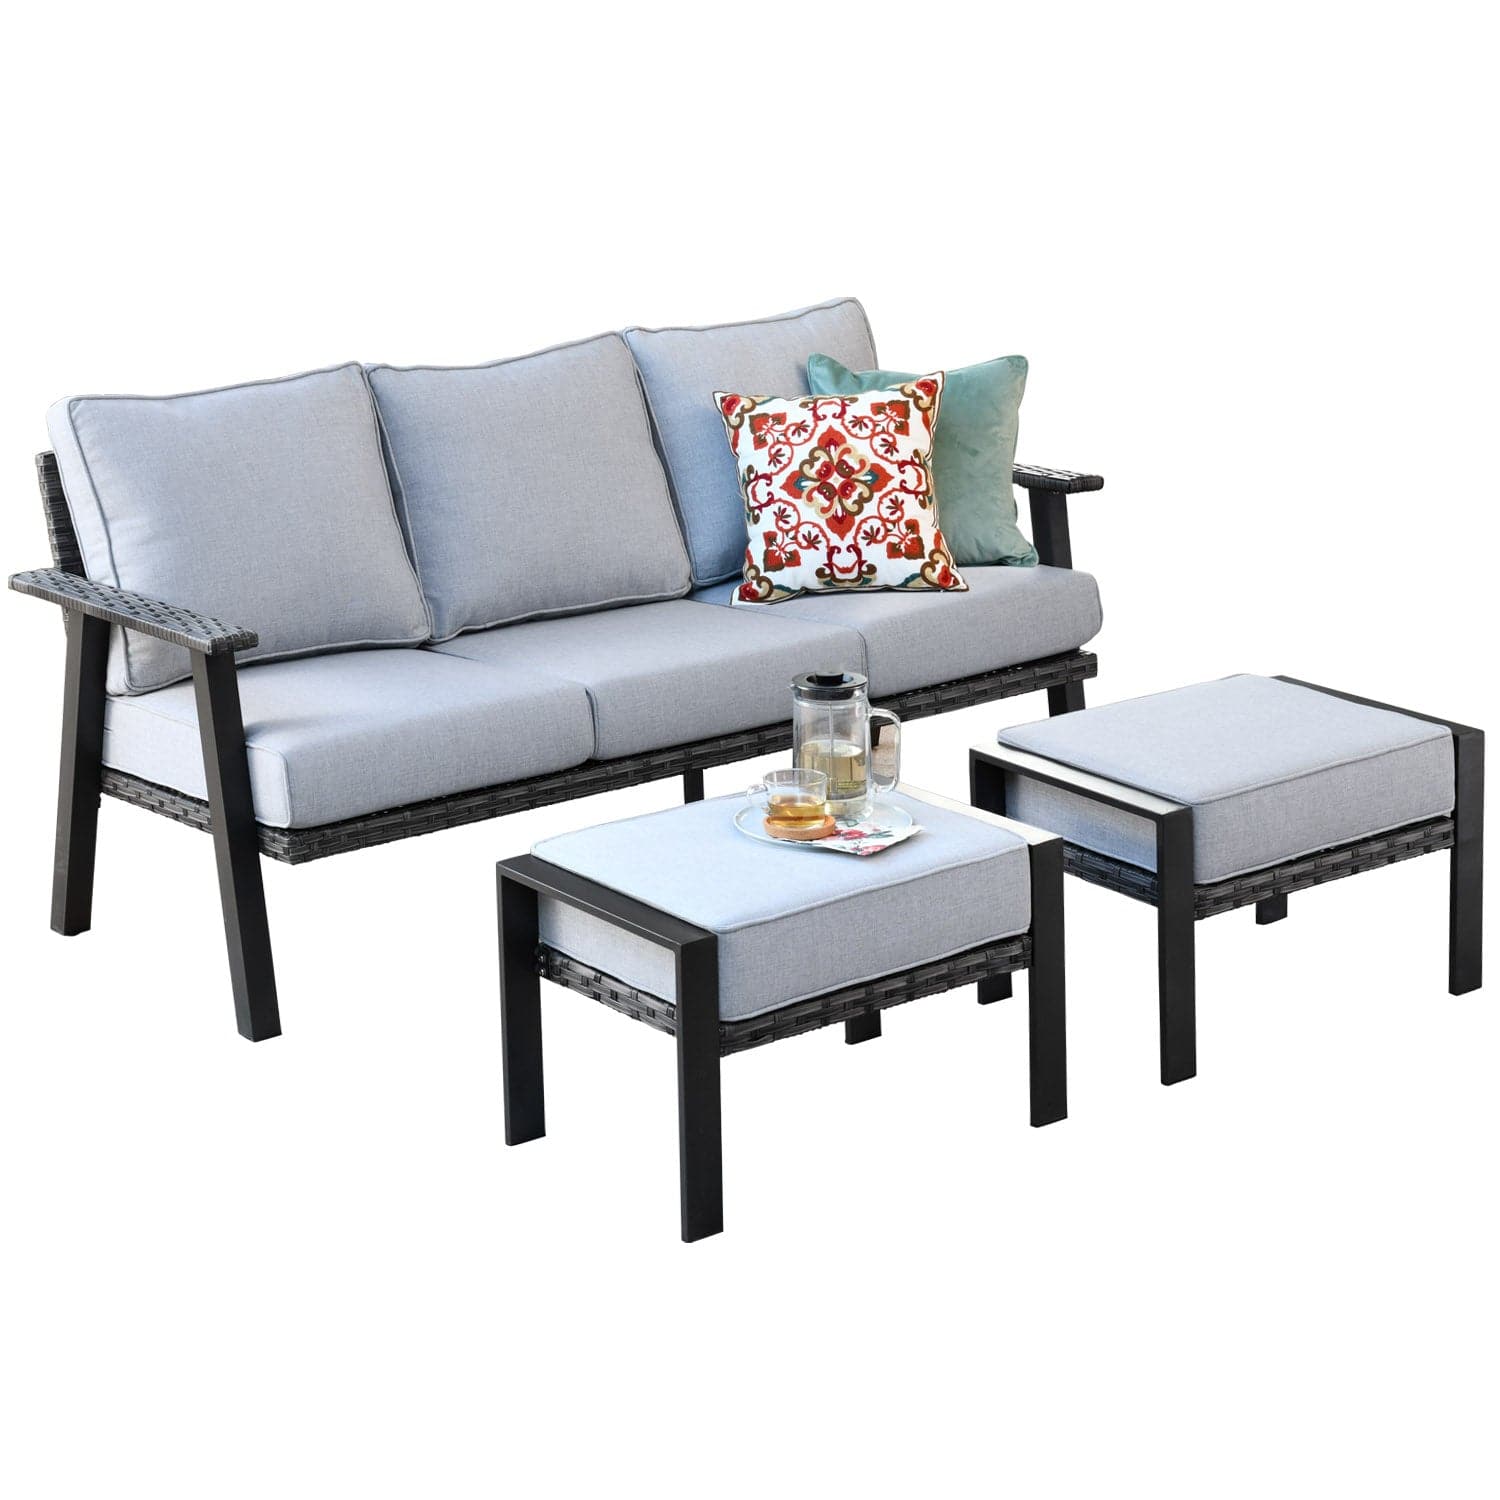 Ovios Bistro Set 3 Piece Couch with 2 Ottoman 5'' Cushion, Olefin Fabric